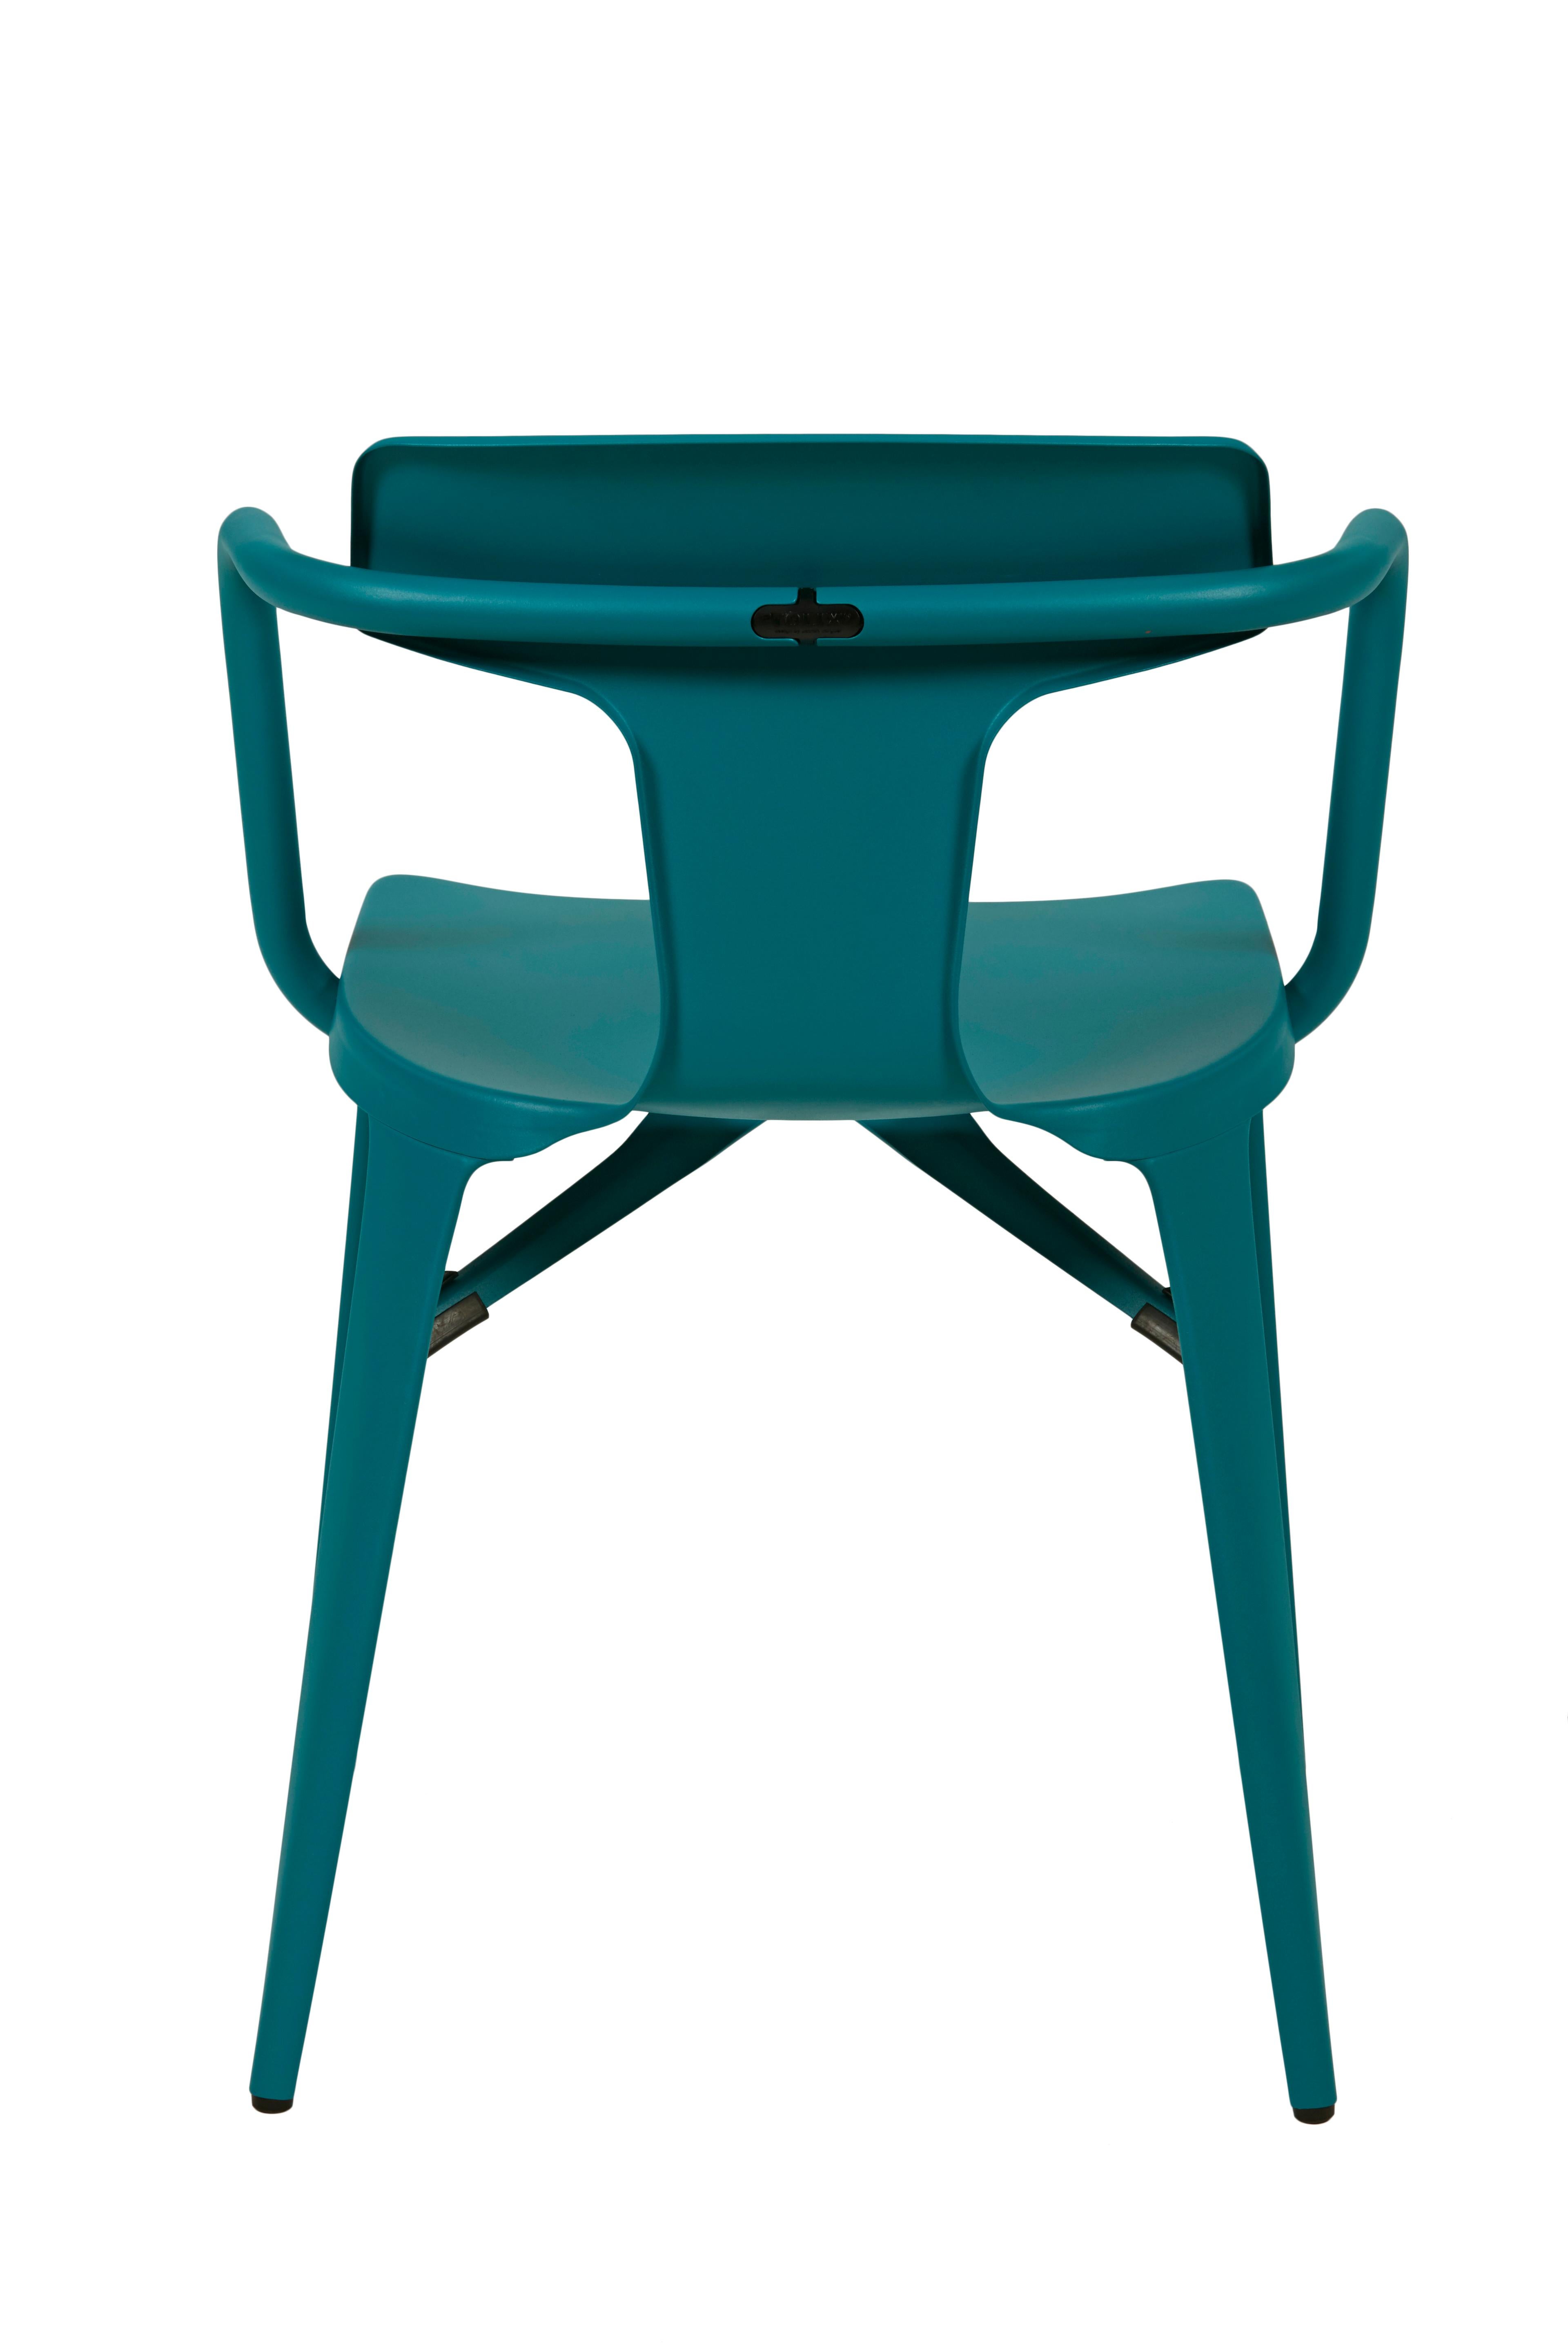 Im Angebot: T14 Chair in Pop Colors by Patrick Norguet and Tolix, Green (Vert Canard) 2